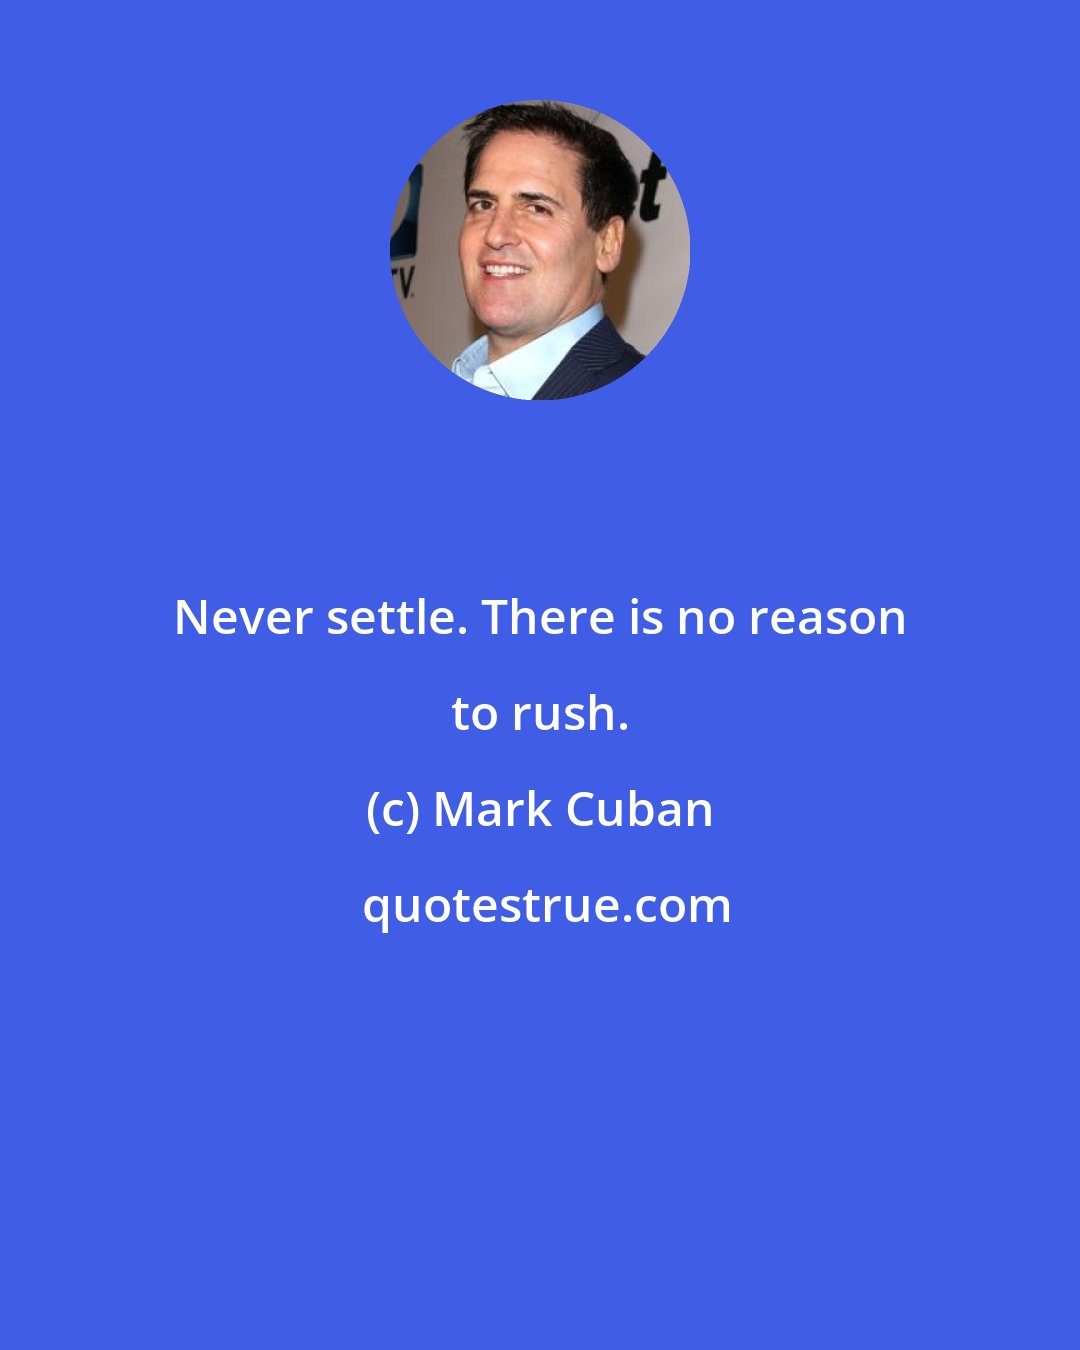 Mark Cuban: Never settle. There is no reason to rush.